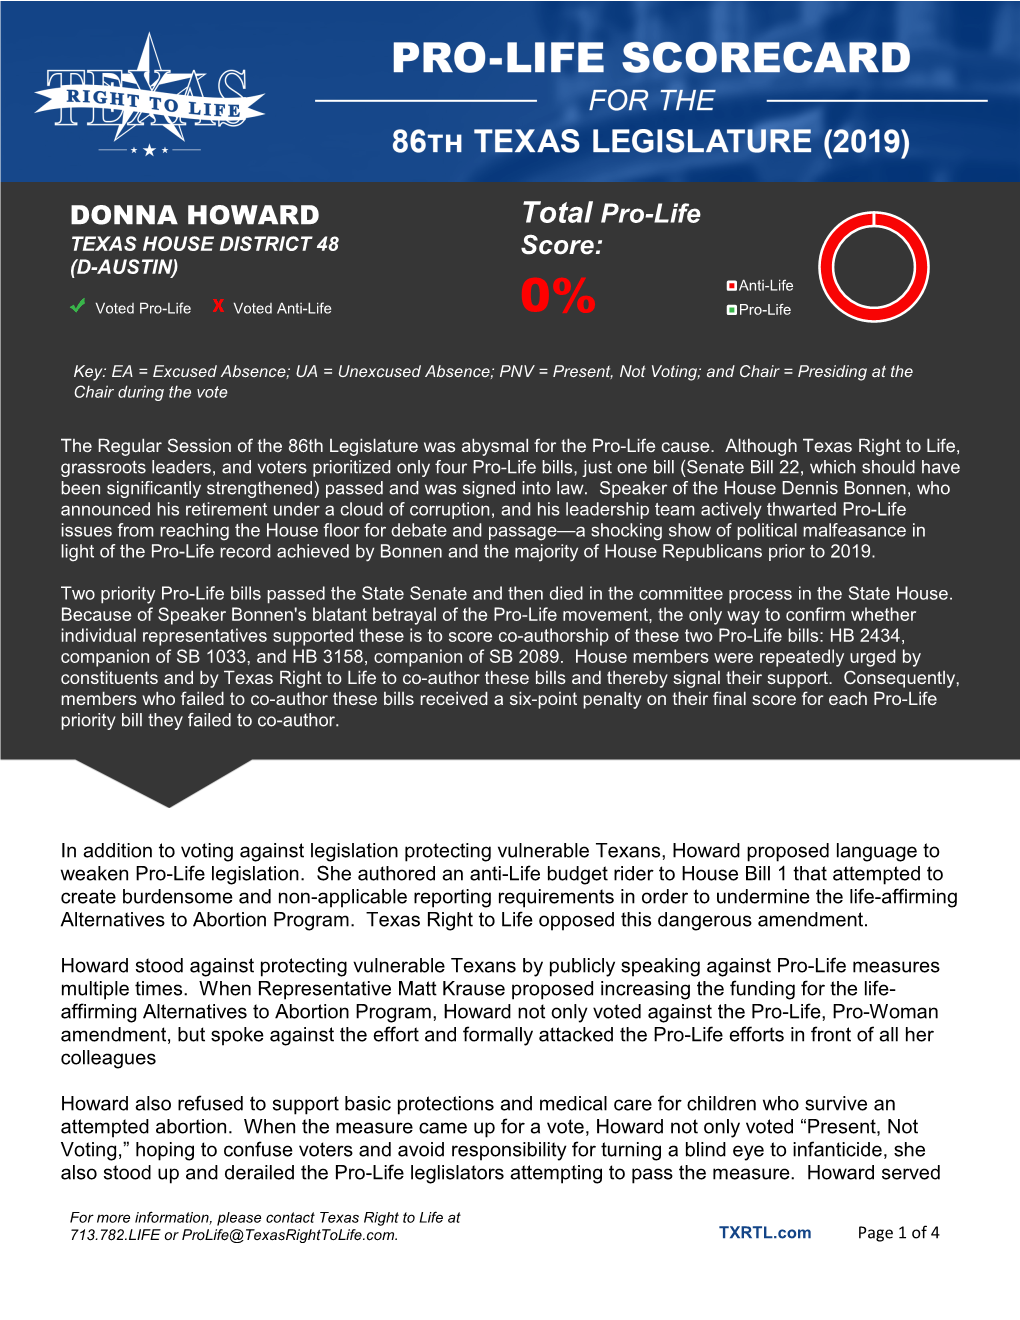 DONNA HOWARD Total Pro-Life Score